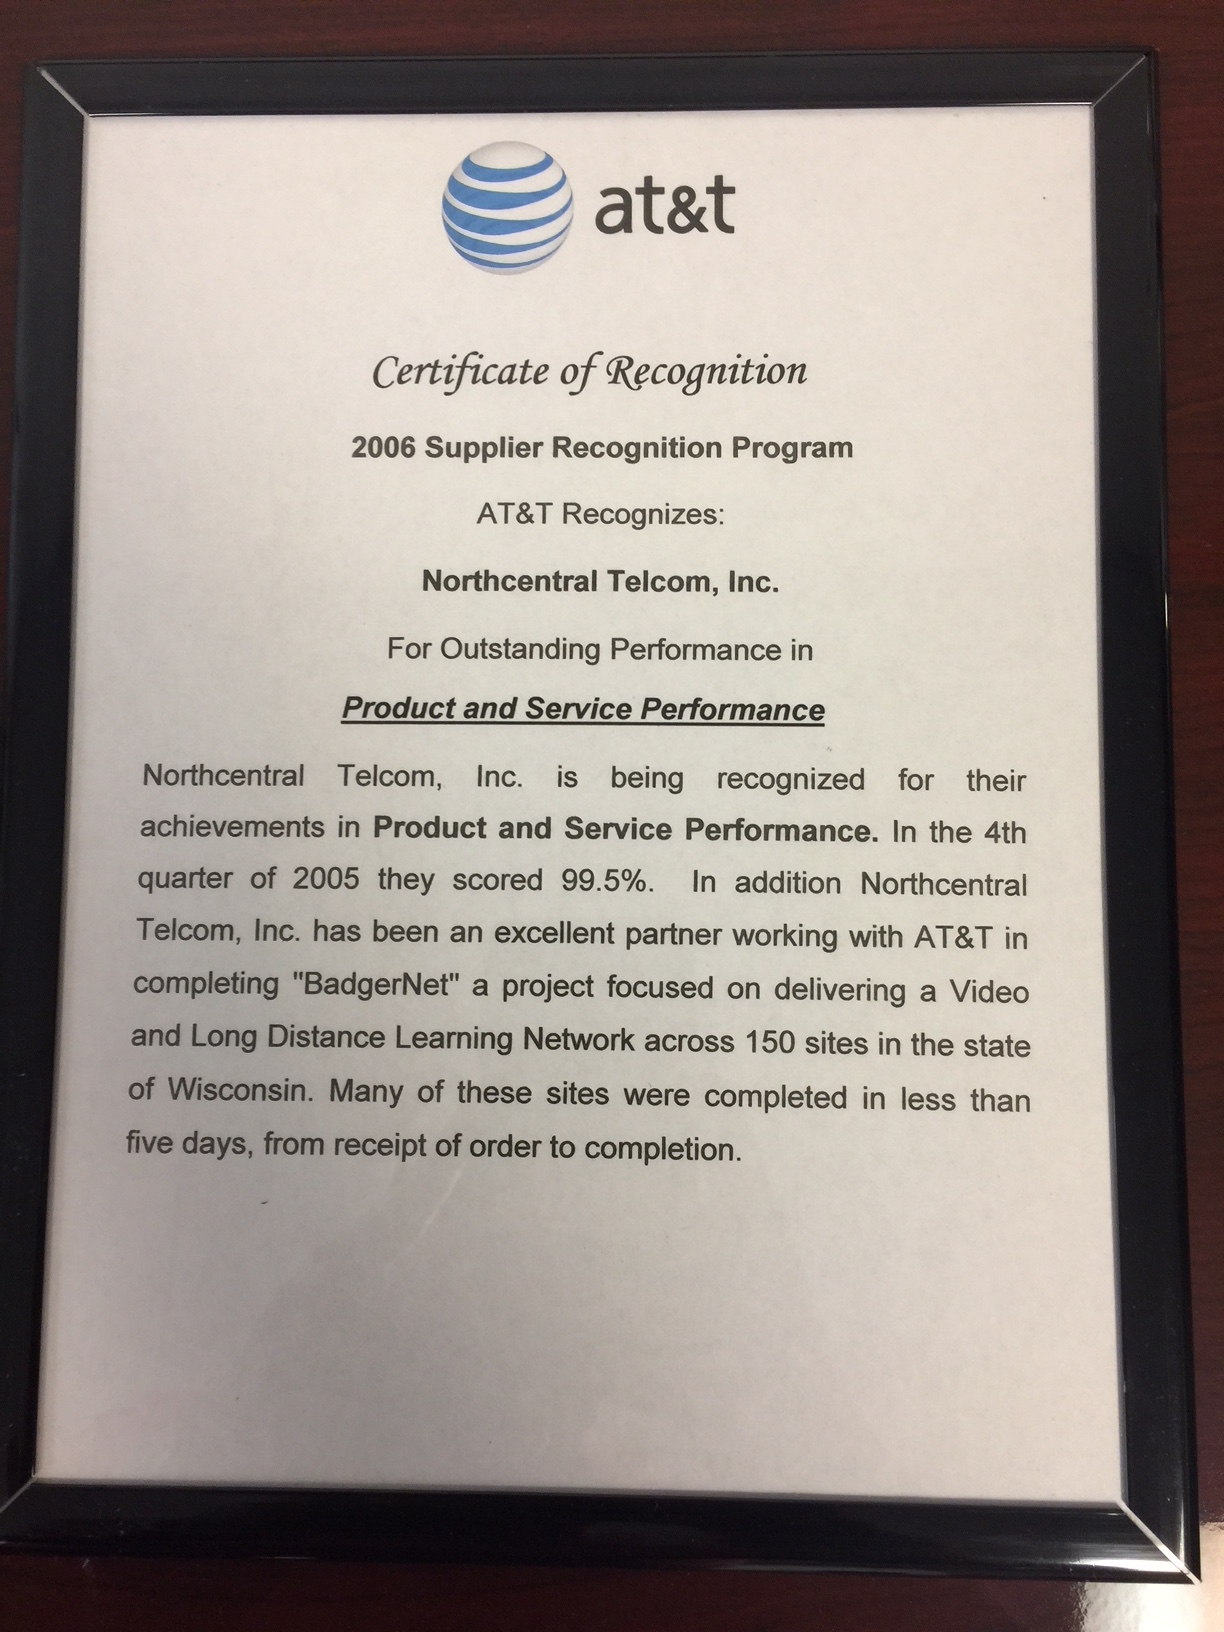 Northcentral Telcom, Inc. - AT&T 2006 Supplier Recognition Program